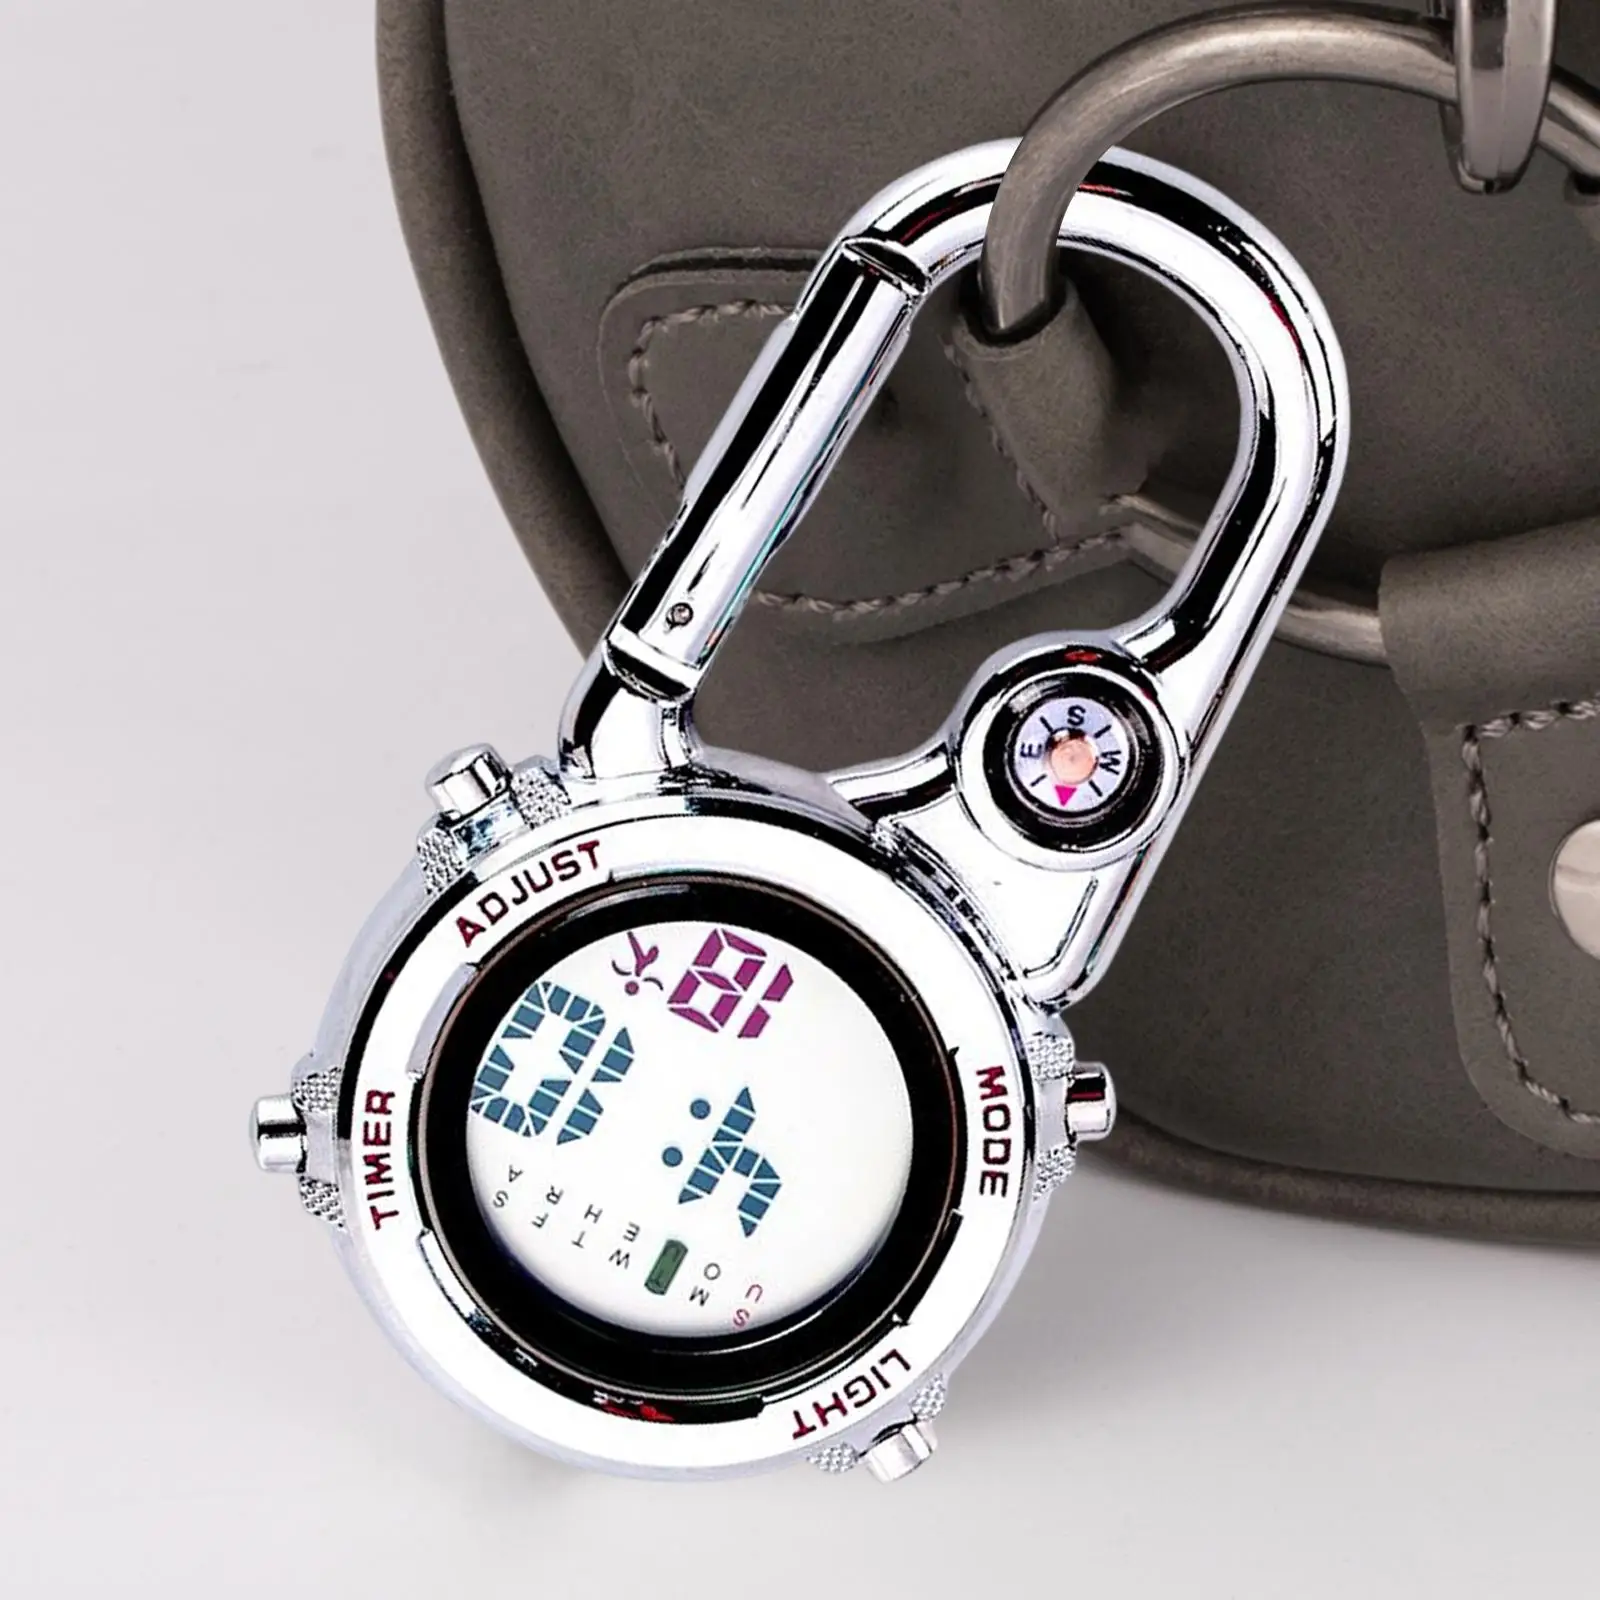 Multifunctional Digital Carabiner Watch Backpack Watch for Outdoor Sports